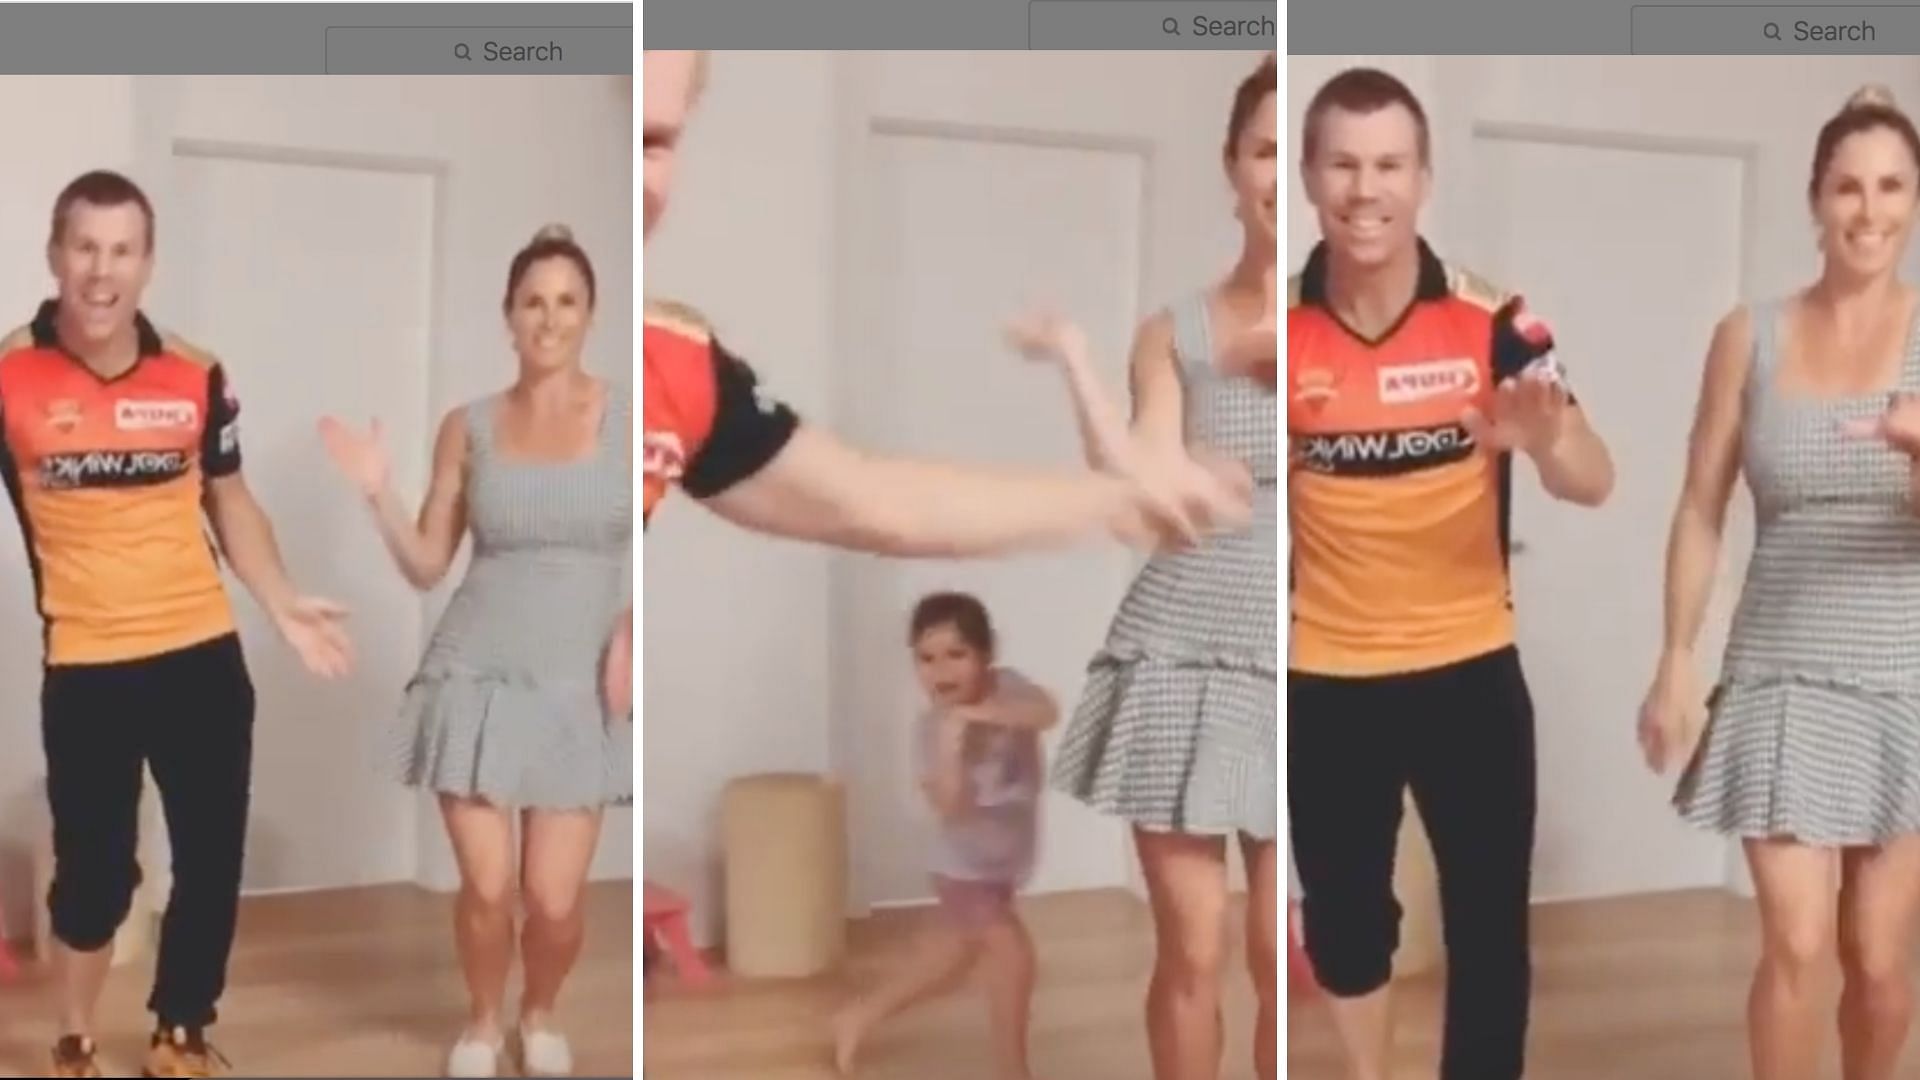 Warner posted yet another Tik Tok video in which he and his wife Candice are dancing on a popular song ‘Butta Bomma’.